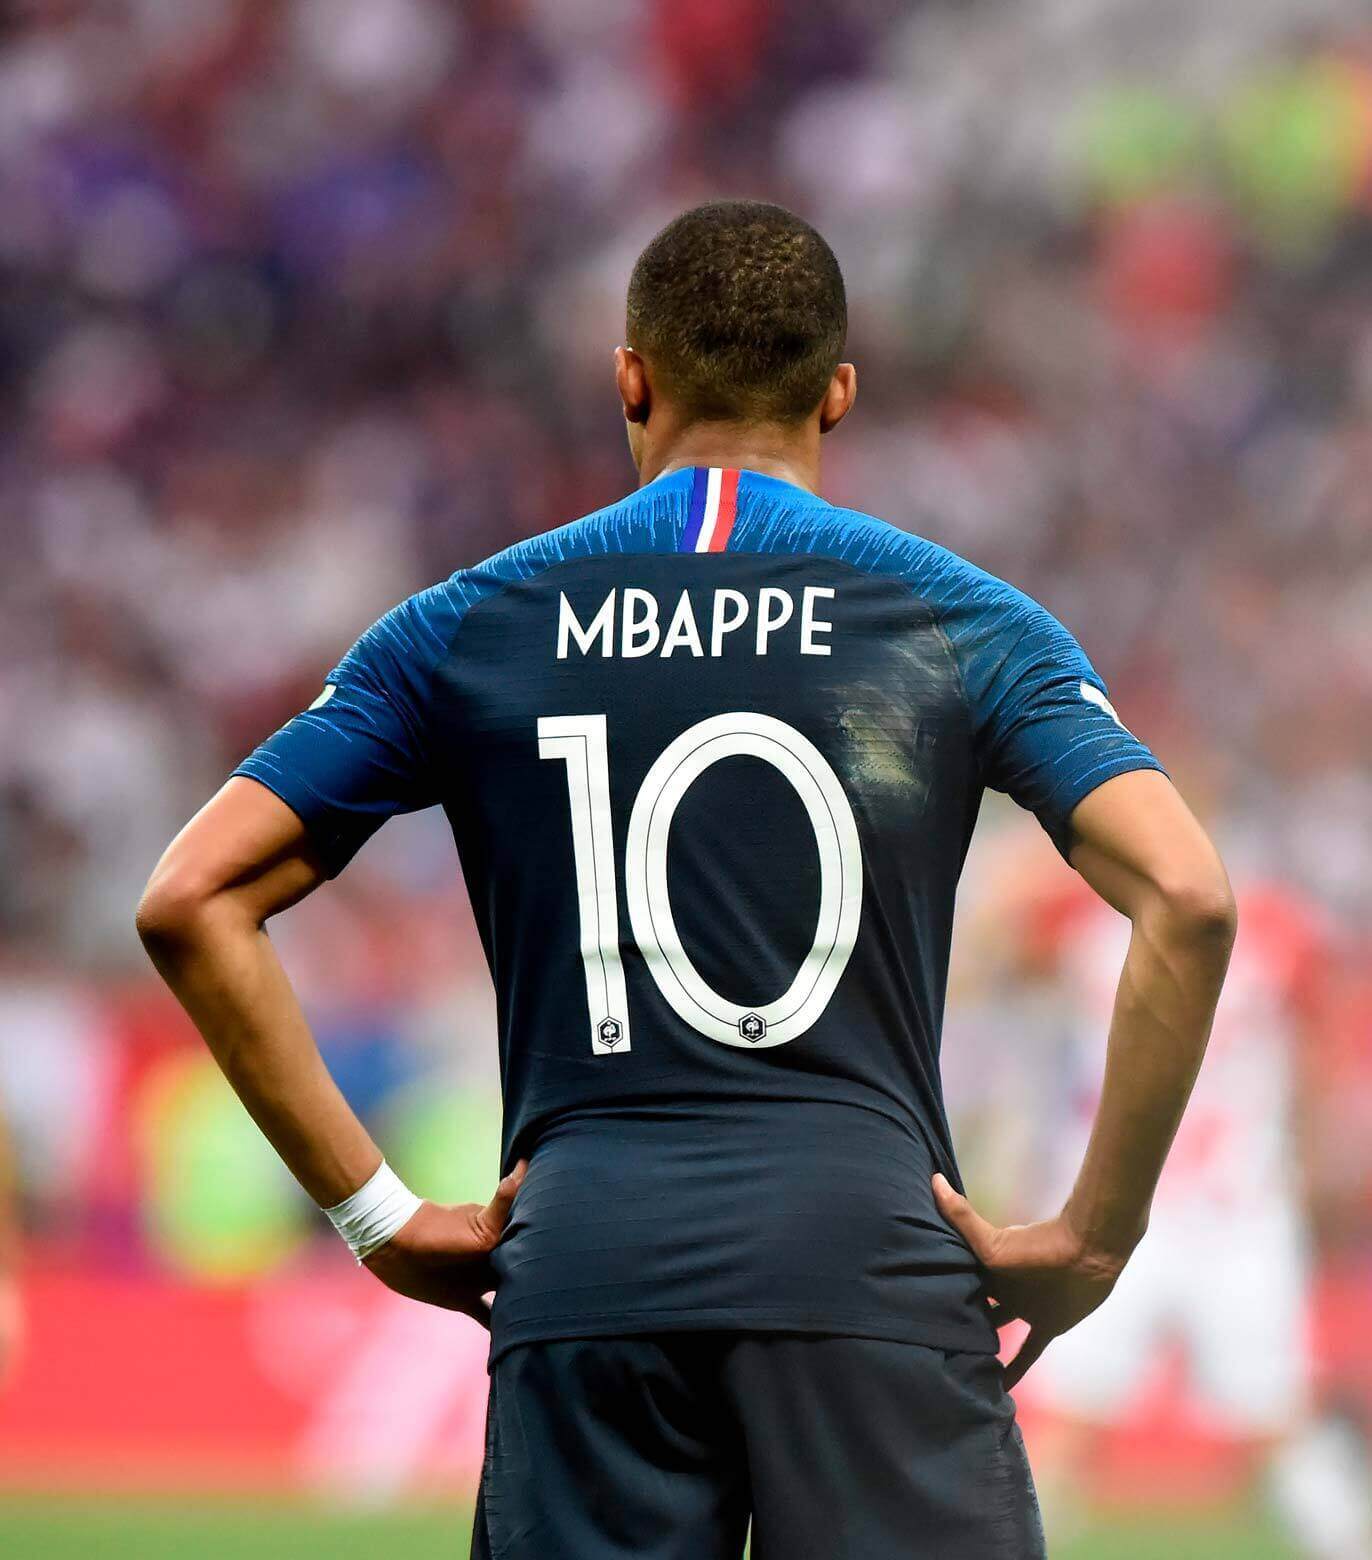 soccer player Mbappe on the pitch with his back turned